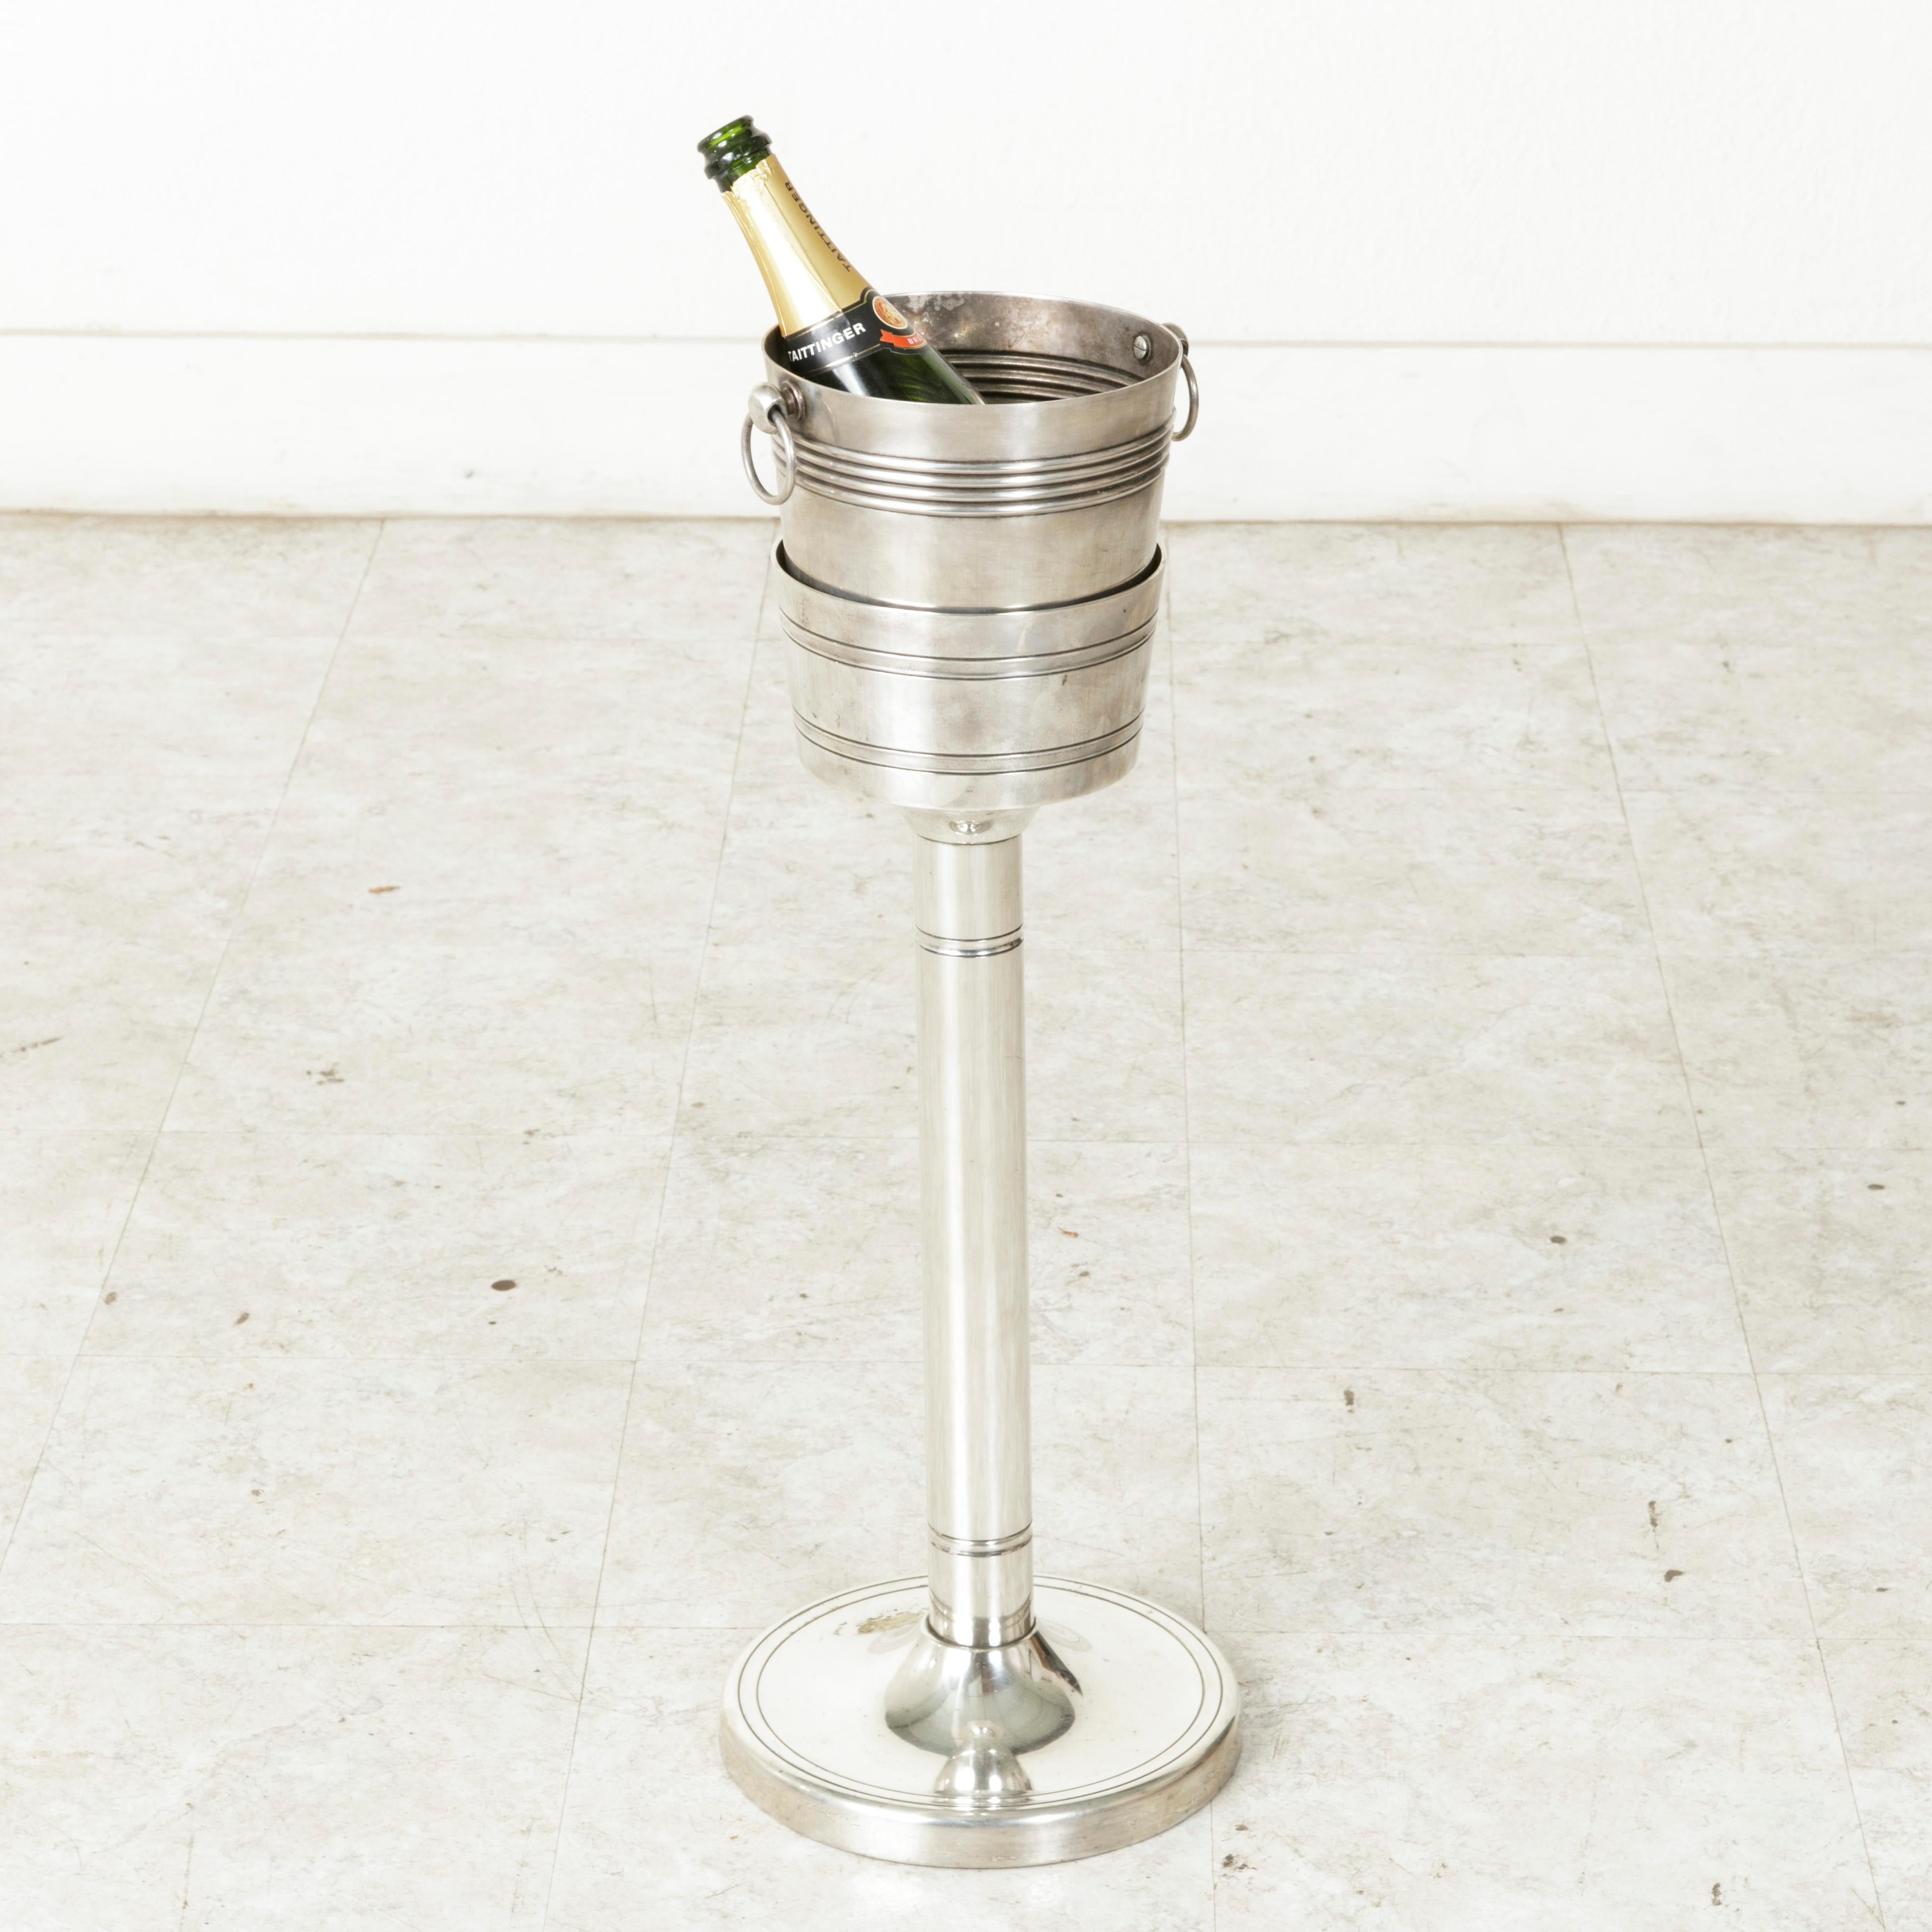 Originally used in a French restaurant to be placed beside a dining table, this silver plate champagne stand contains its original corresponding silver plate bucket. Simple designs of banding encircle the bucket and stand. The stand is 24 inches in